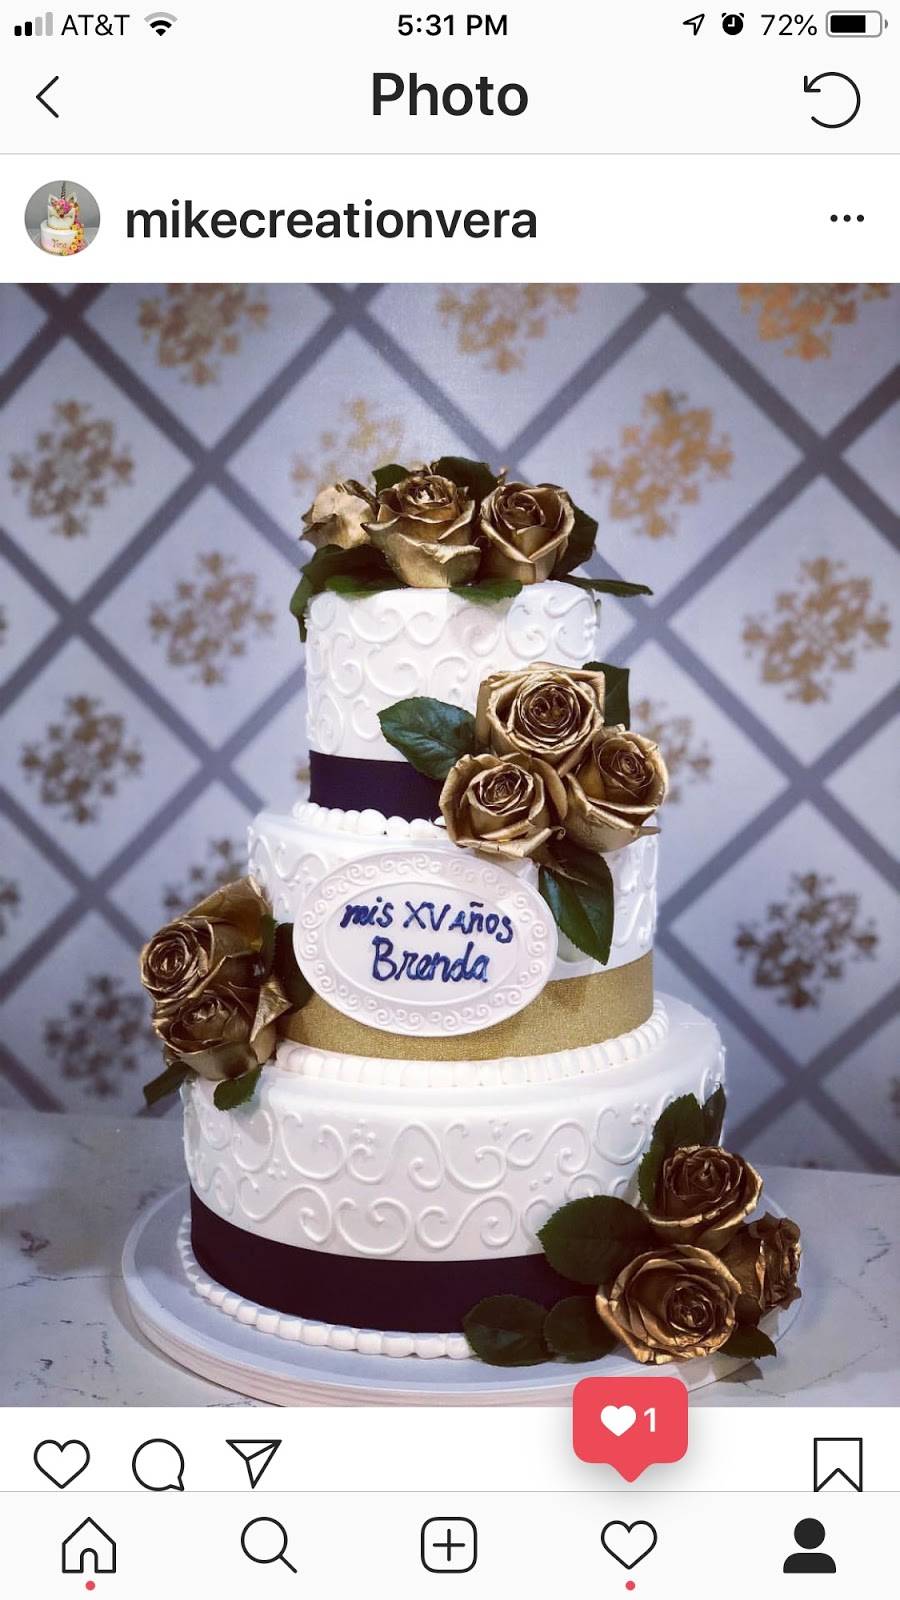 Mikecreations cakes | 10504s Praire ave, Inglewood, CA 90303, USA | Phone: (424) 750-9700